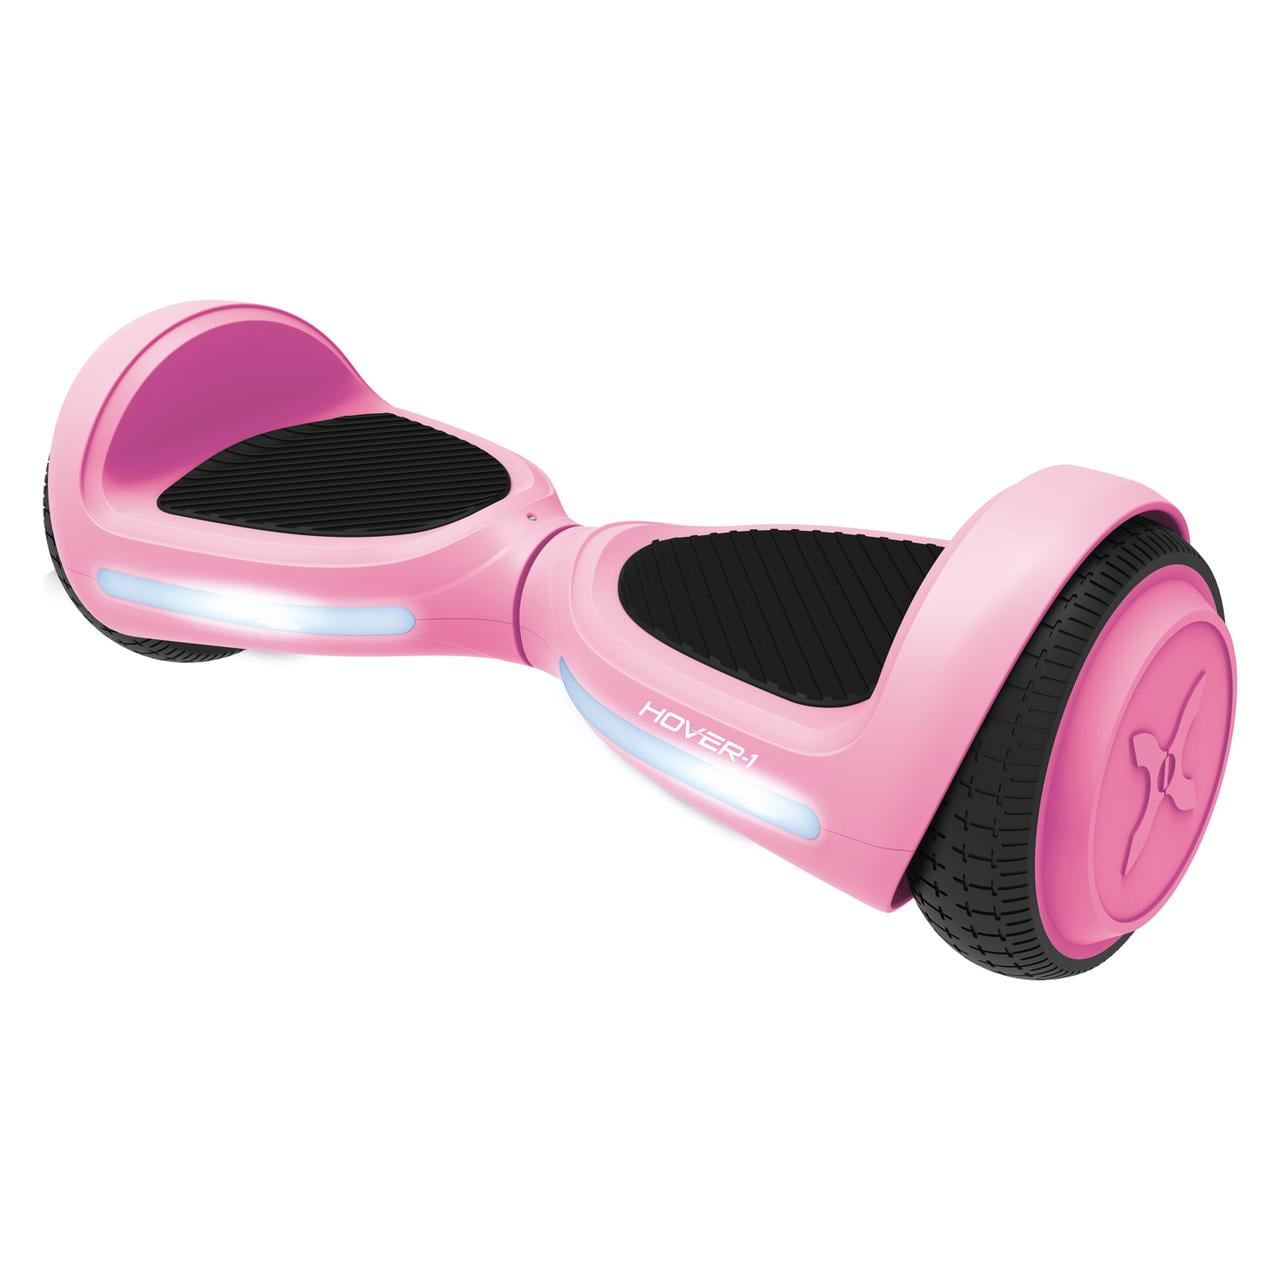 Hover-1 My Hoverboard Kids Hoverboard w/ LED Headlights, 5 MPH Max Speed, Max Weight, 3 Miles Max Distance - Pink - Walmart.com